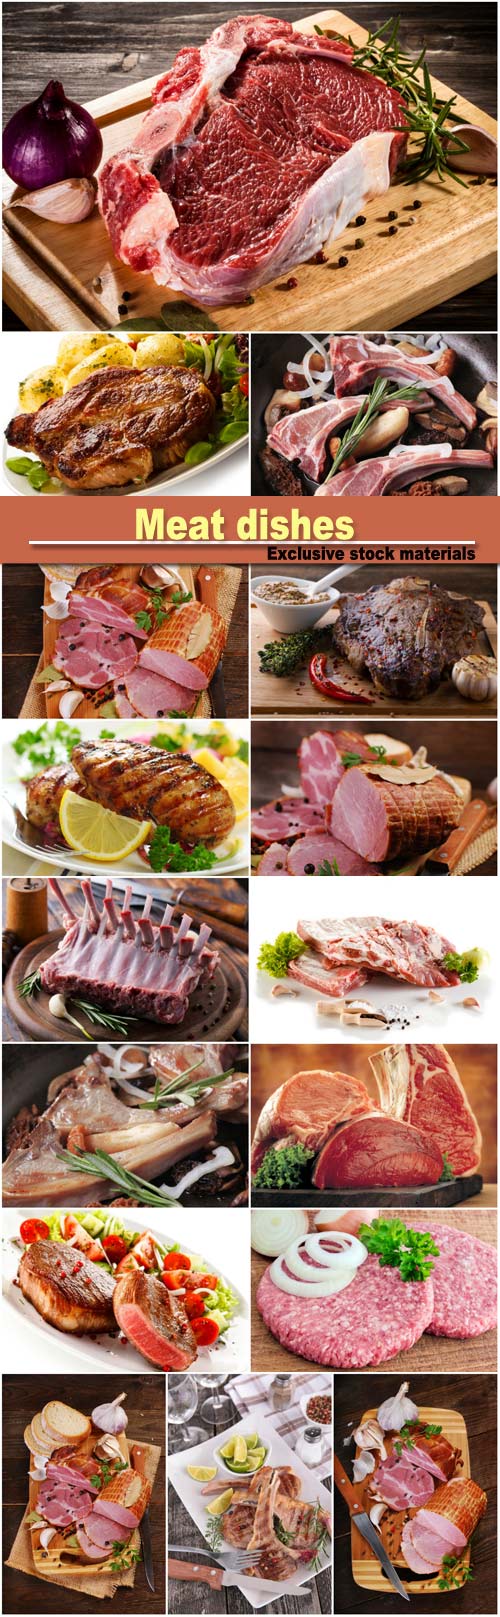 Meat dishes, lamb chops, smoked ham, lamb ribs with spices and herbs